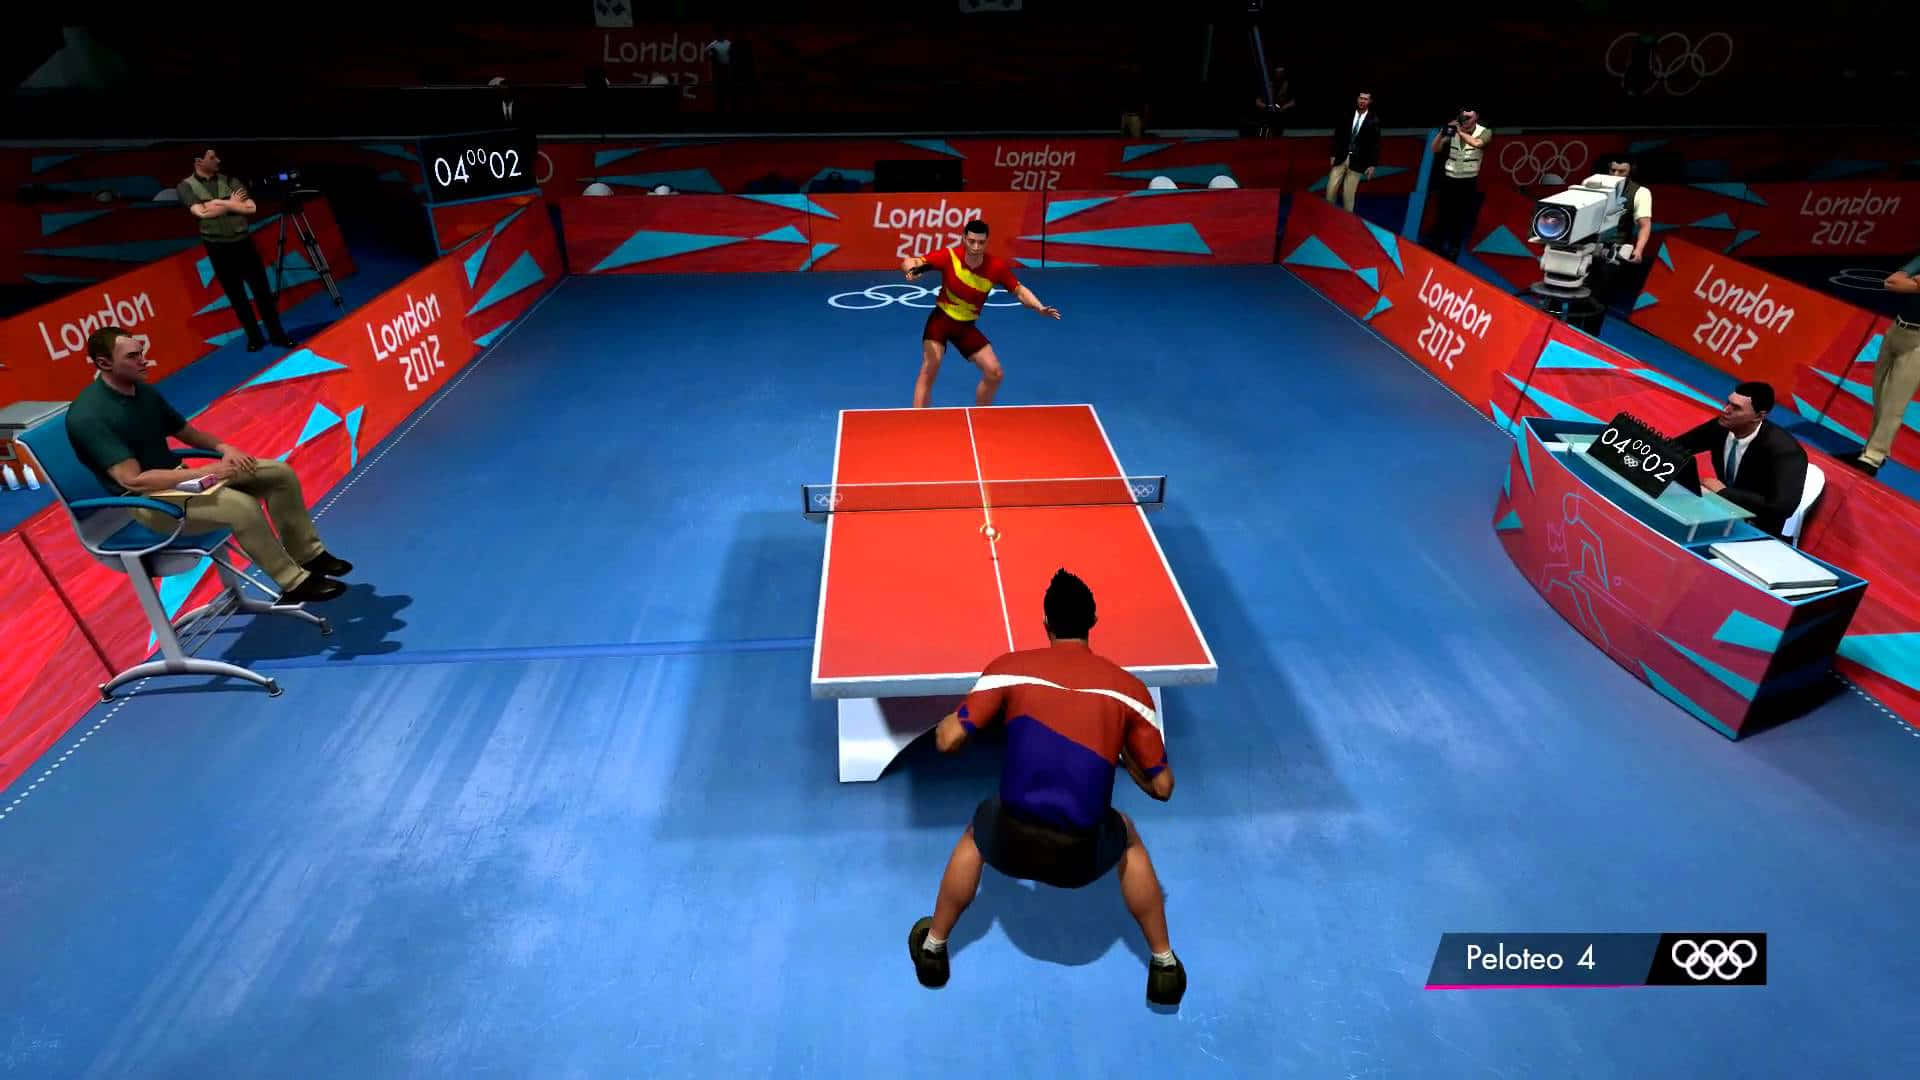 Hit a Winning Serve at the Table Tennis Tournament